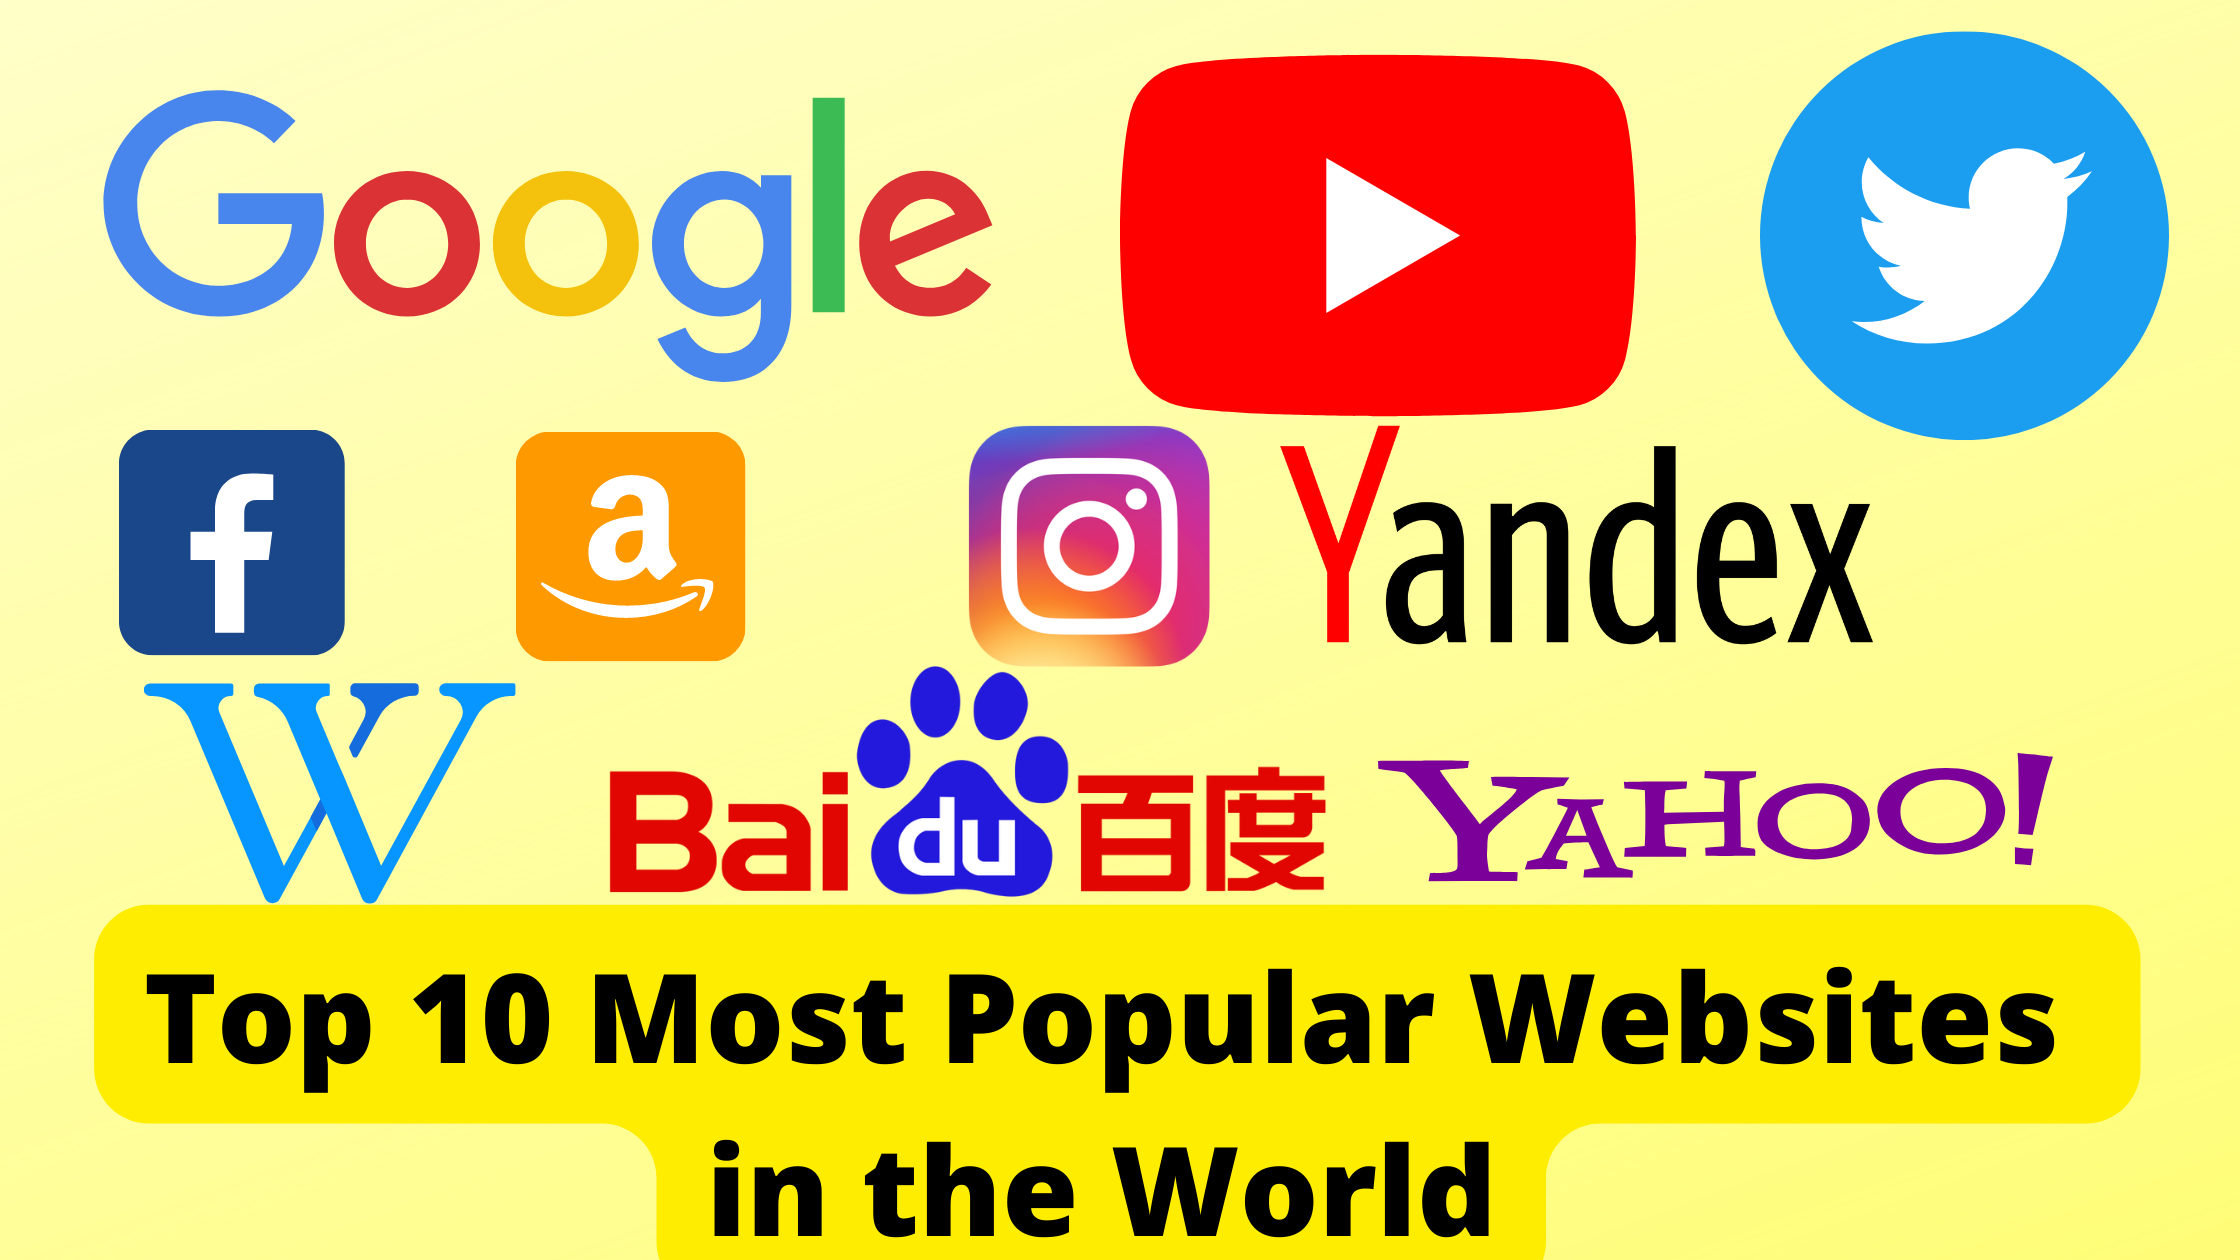 Top 10 Most Popular Websites in the World